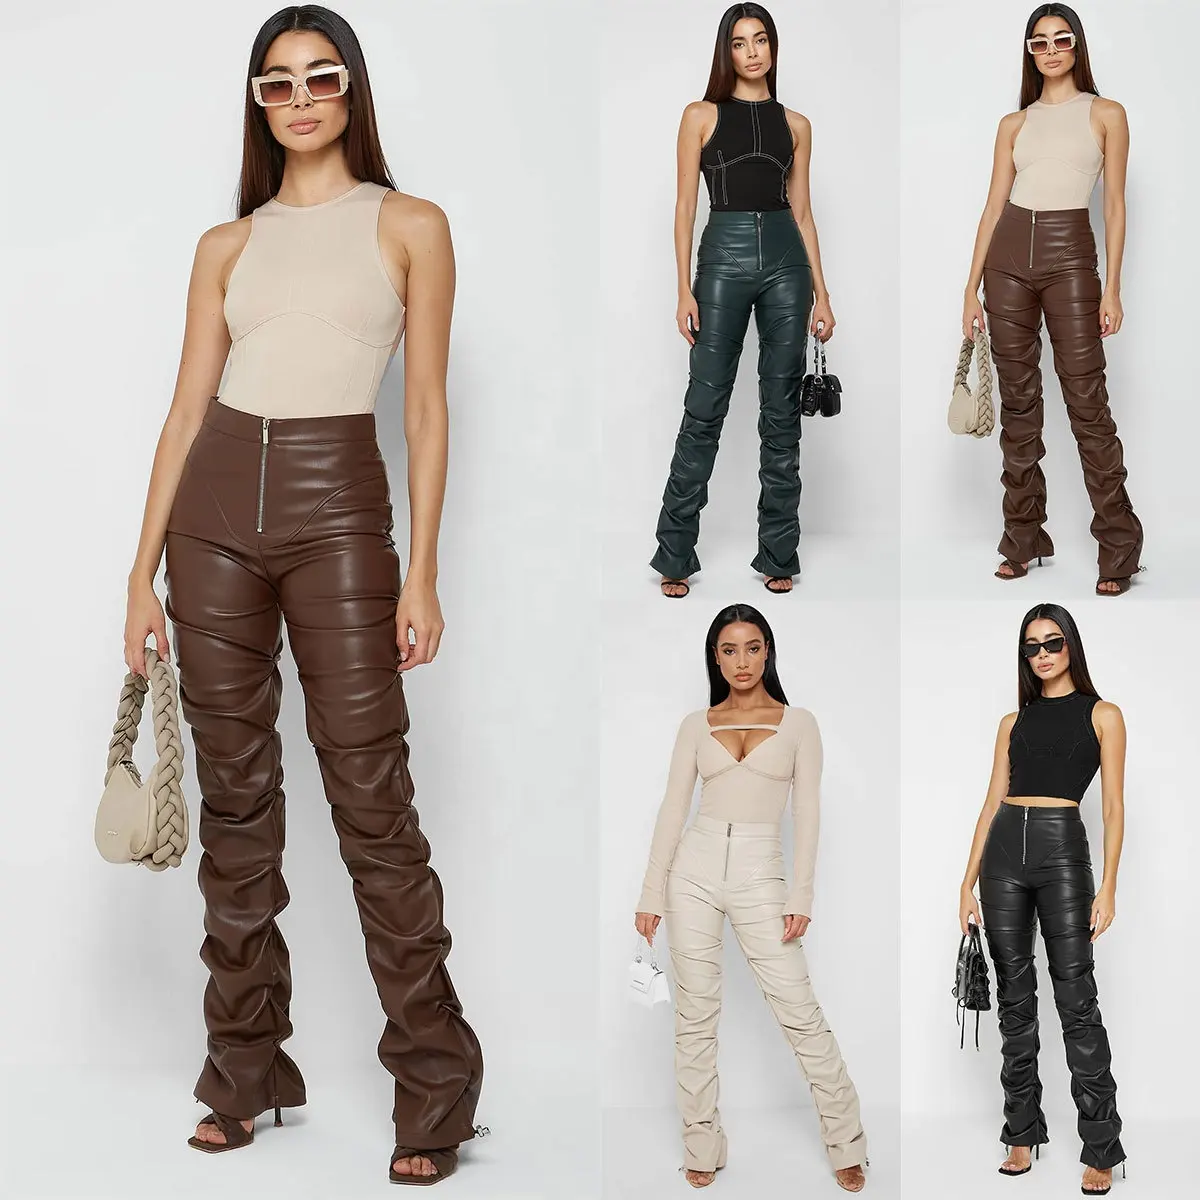 OUDINA Fashion Street High Waist Casual Trousers Zipper PU Pleated Brown Stacked Pants Women Leather Pants